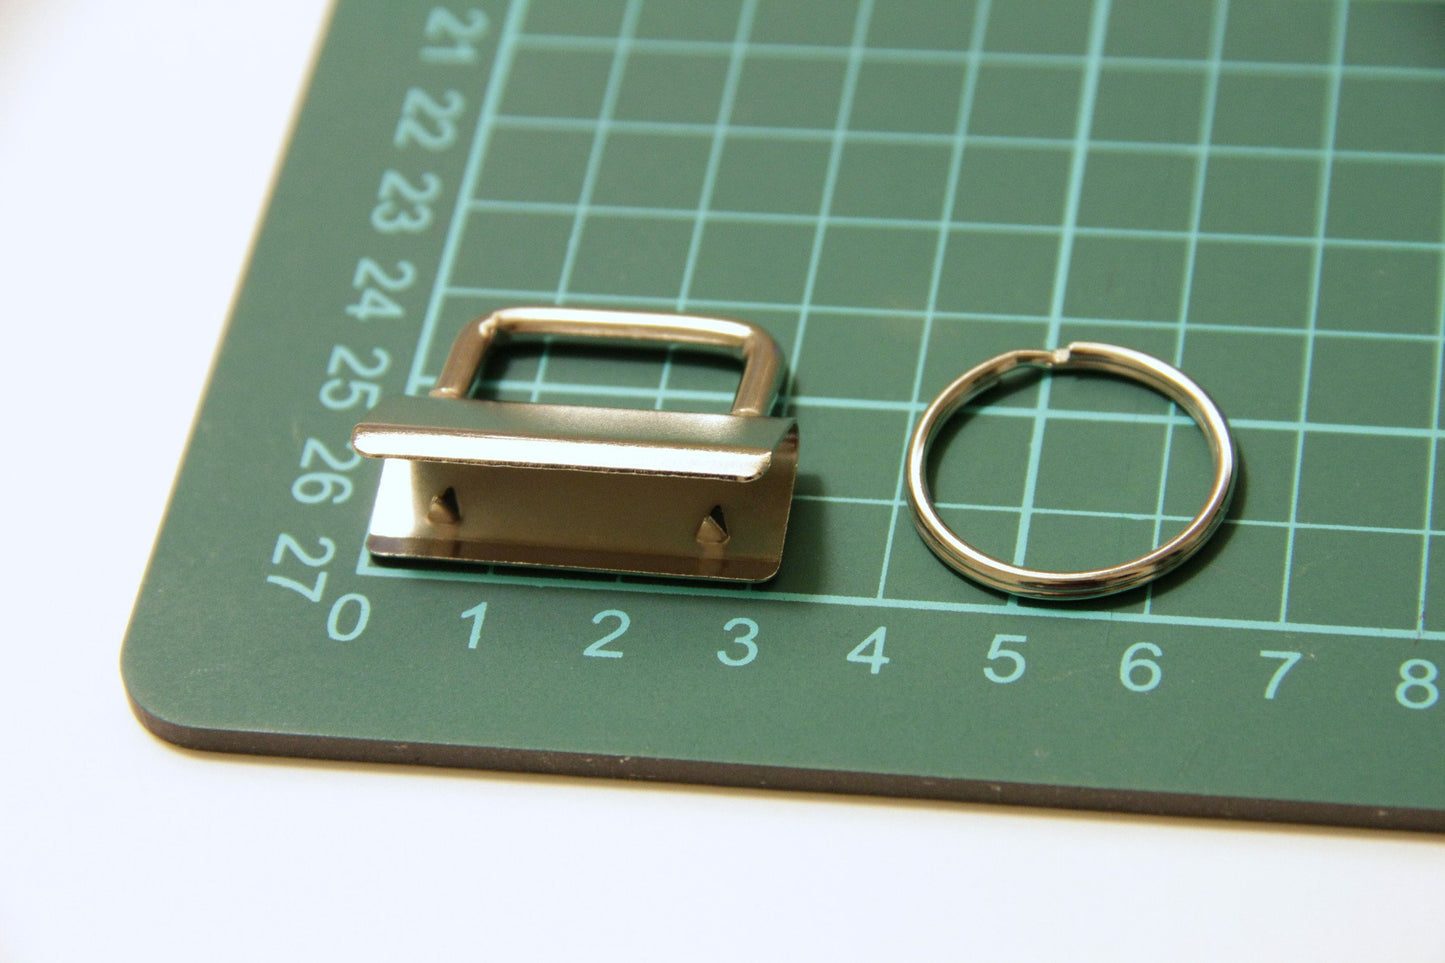 Key Fob Hardware - 1.25" (32mm), with 25mm Split Ring